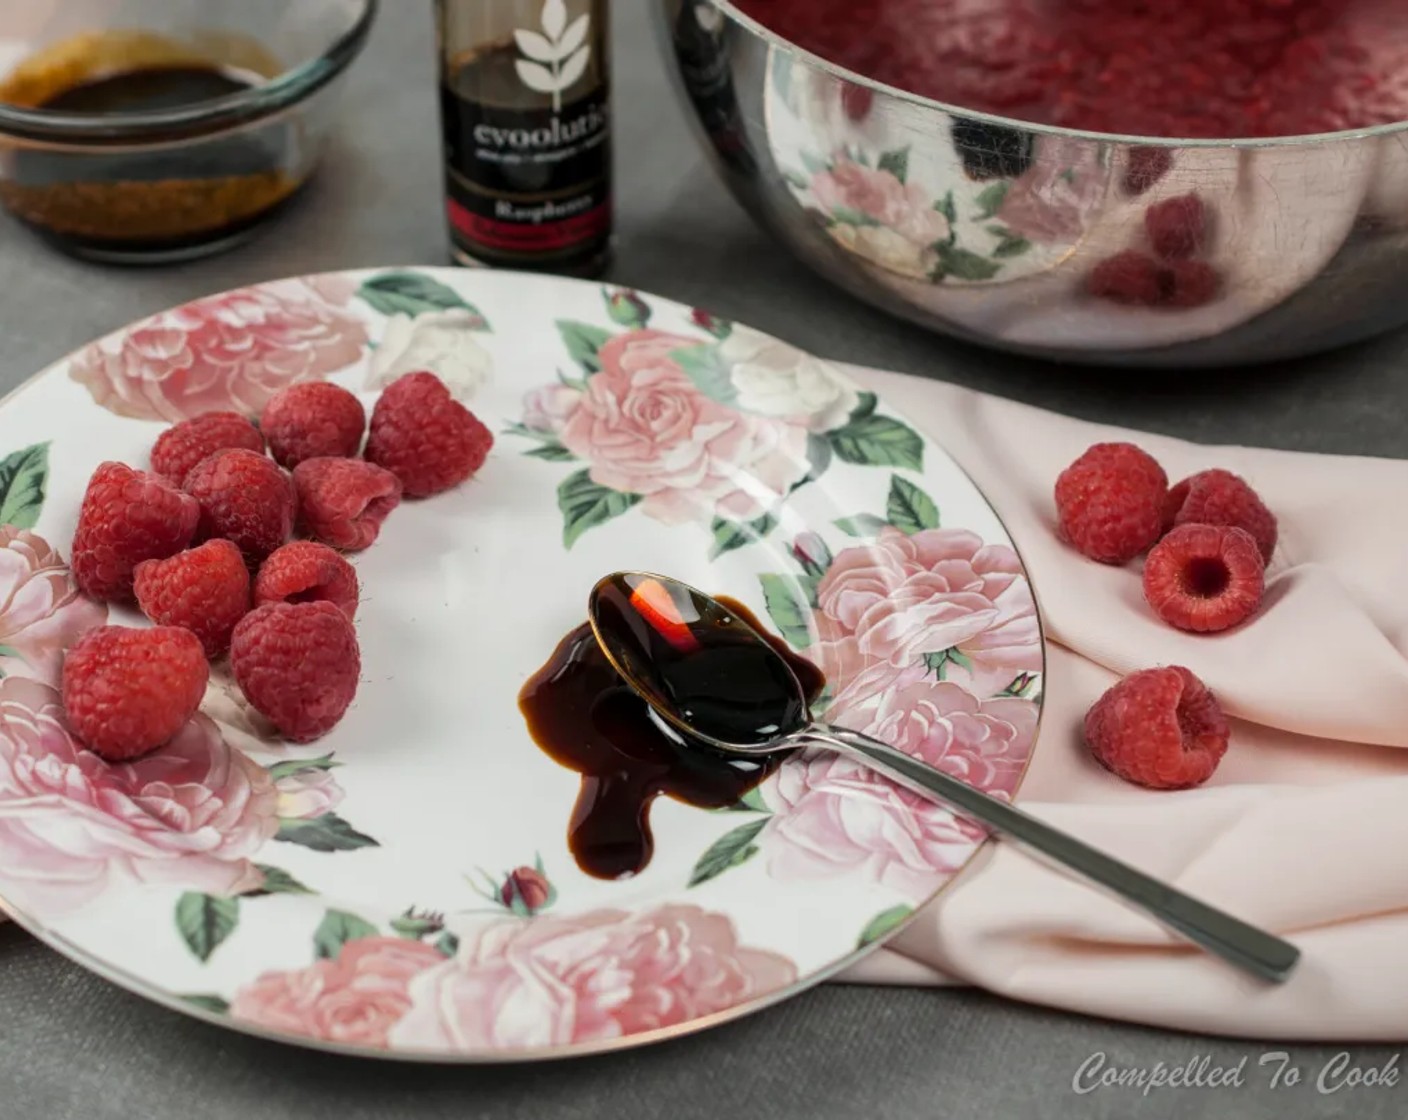 step 2 In a medium sauce pan stir together Fresh Raspberries (3 cups), Granulated Sugar (1/3 cup), and Water (1/4 cup). Cook over medium heat until raspberries are mashed down and mixture is bubbling. Continue to cook until thick and syrupy, stirring often, approximately 10 minutes.